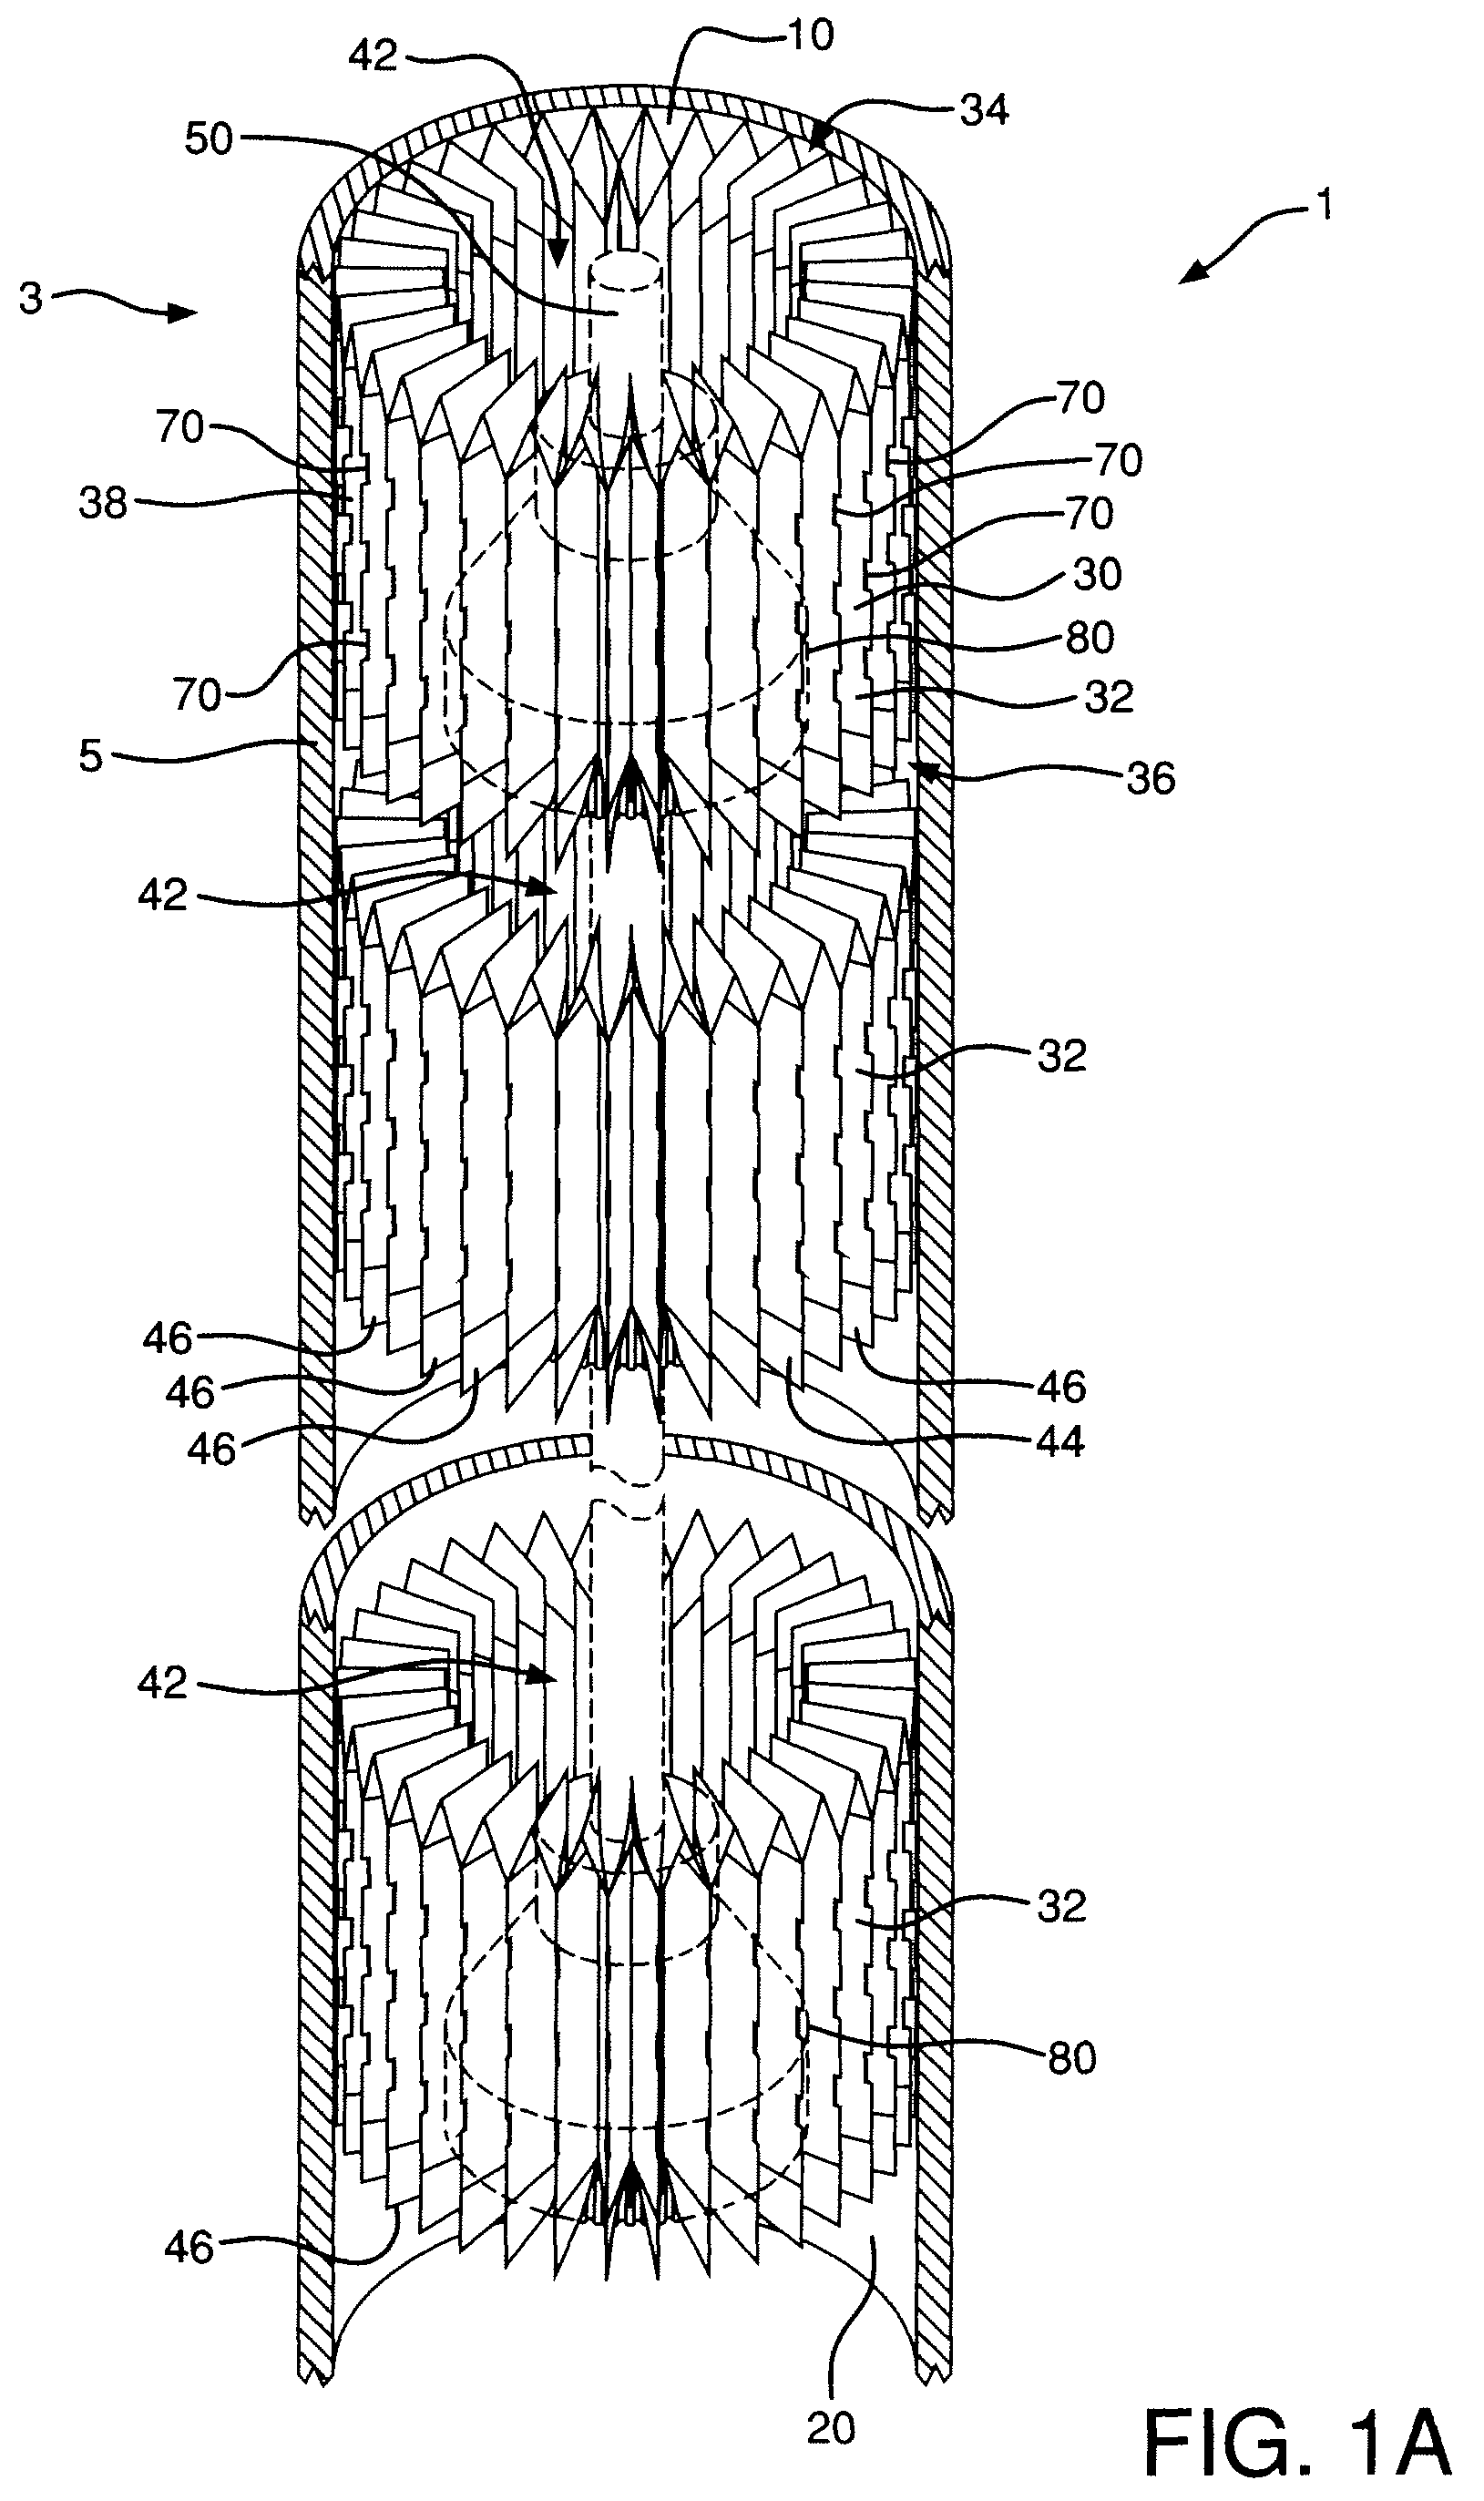 Tubular reactor with expandable insert